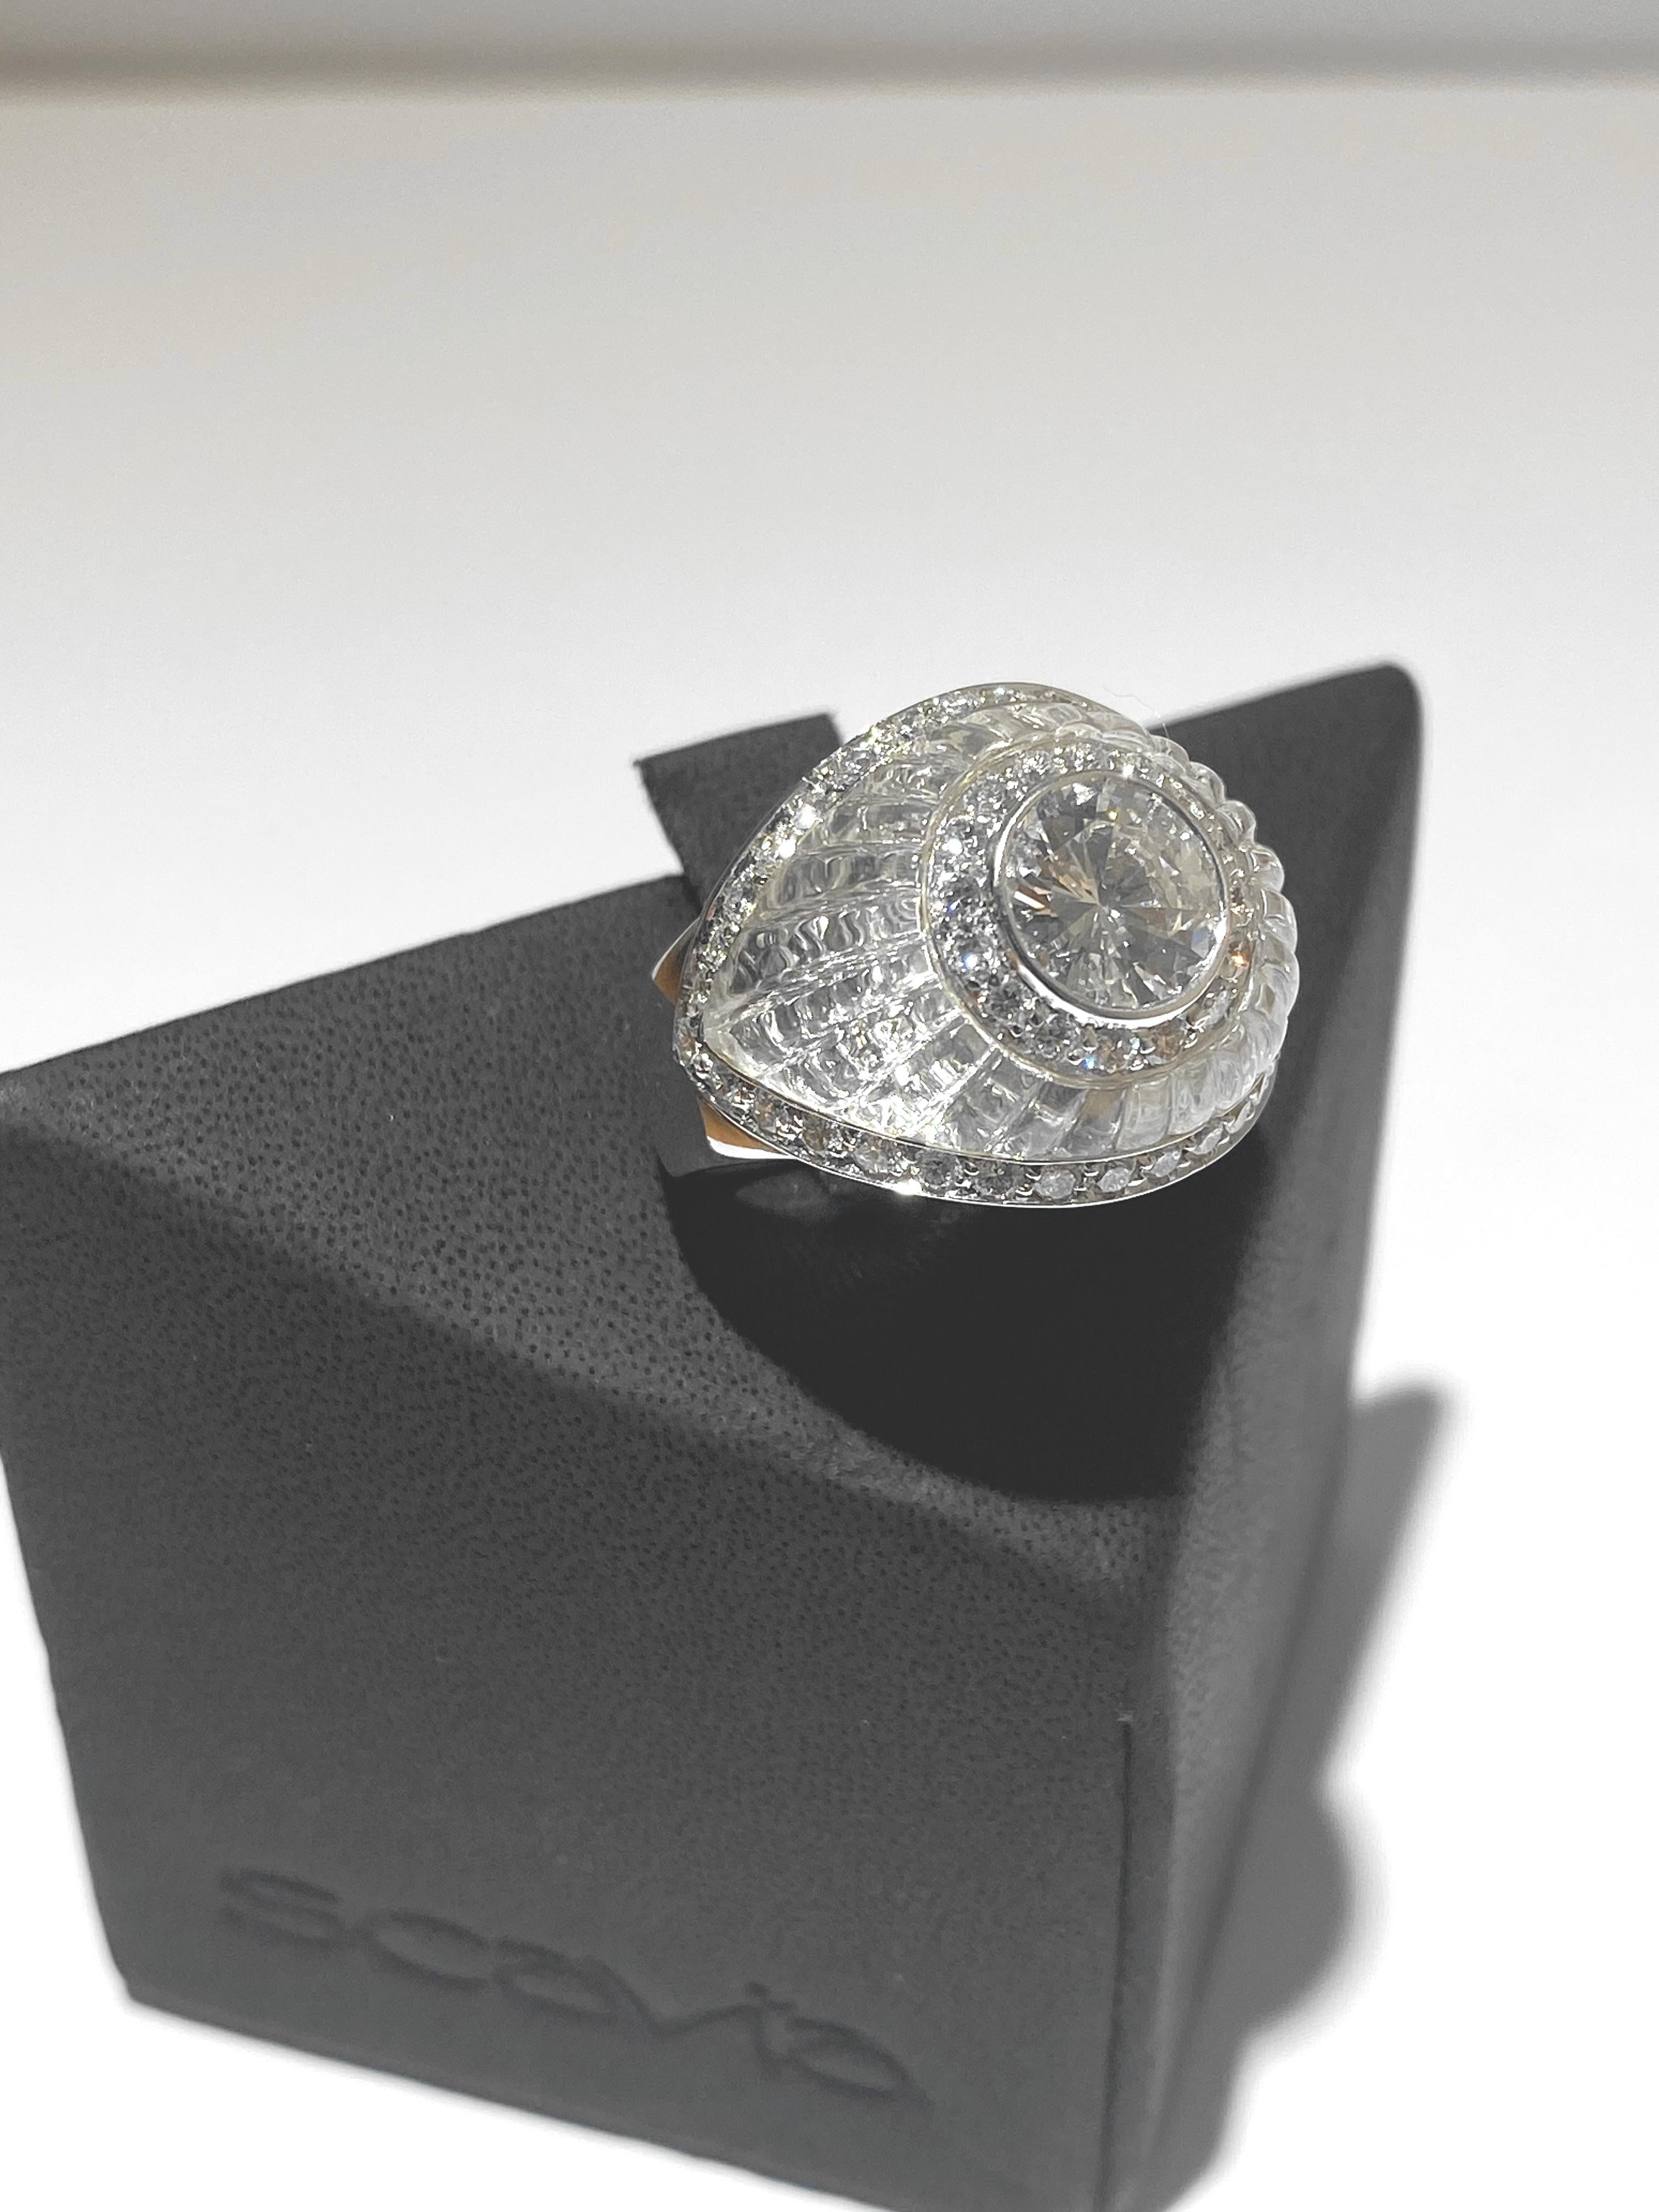 SCAVIA TRASPARENZA Diamond Pave Band Ring In New Condition For Sale In Rome, IT